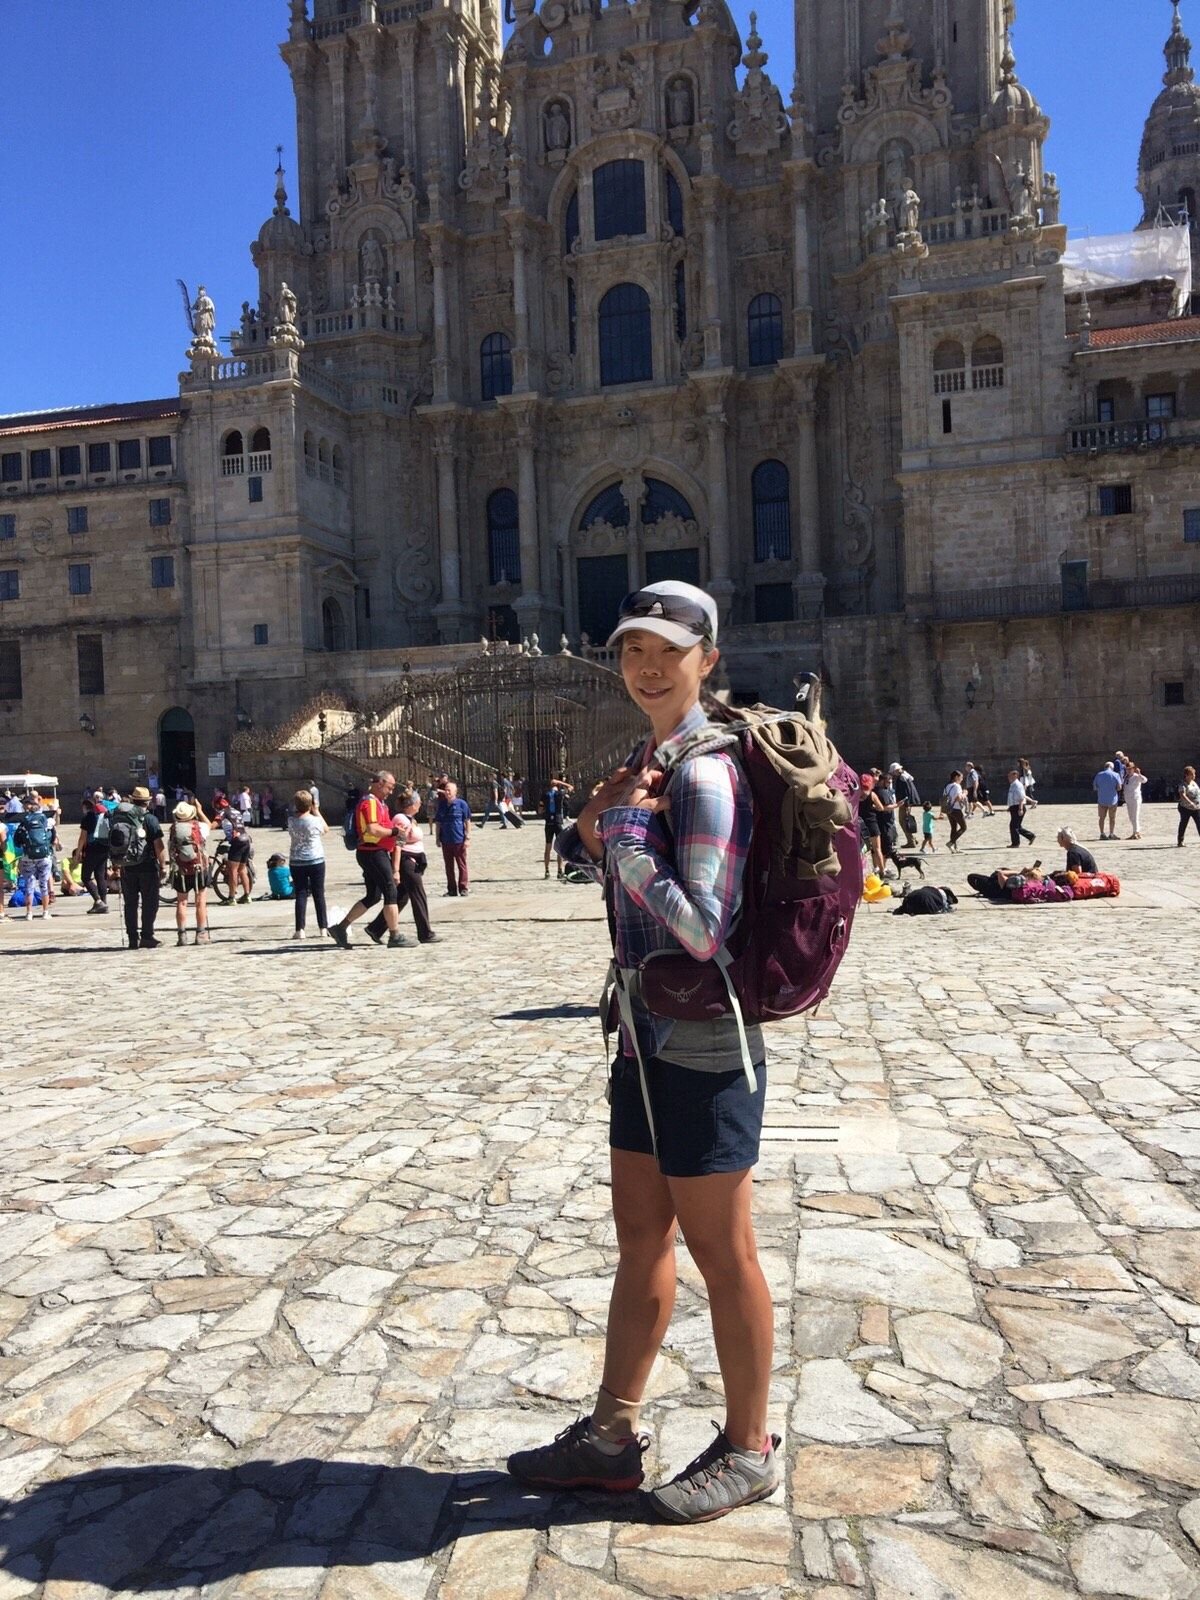  Reaching the final destination of the 300 Mile Camino De Santiago—The shrine of the apostle Saint James the Great in the cathedral of Santiago de Compostela in Galicia in northwestern Spain. 